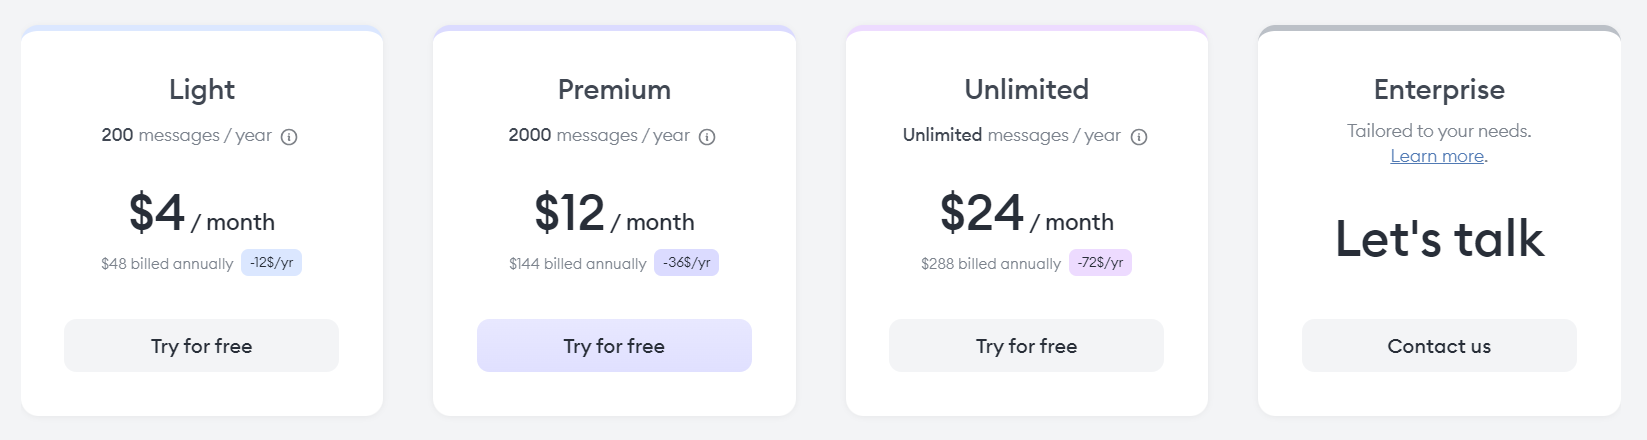 Flowrite AI email writer pricing plans.